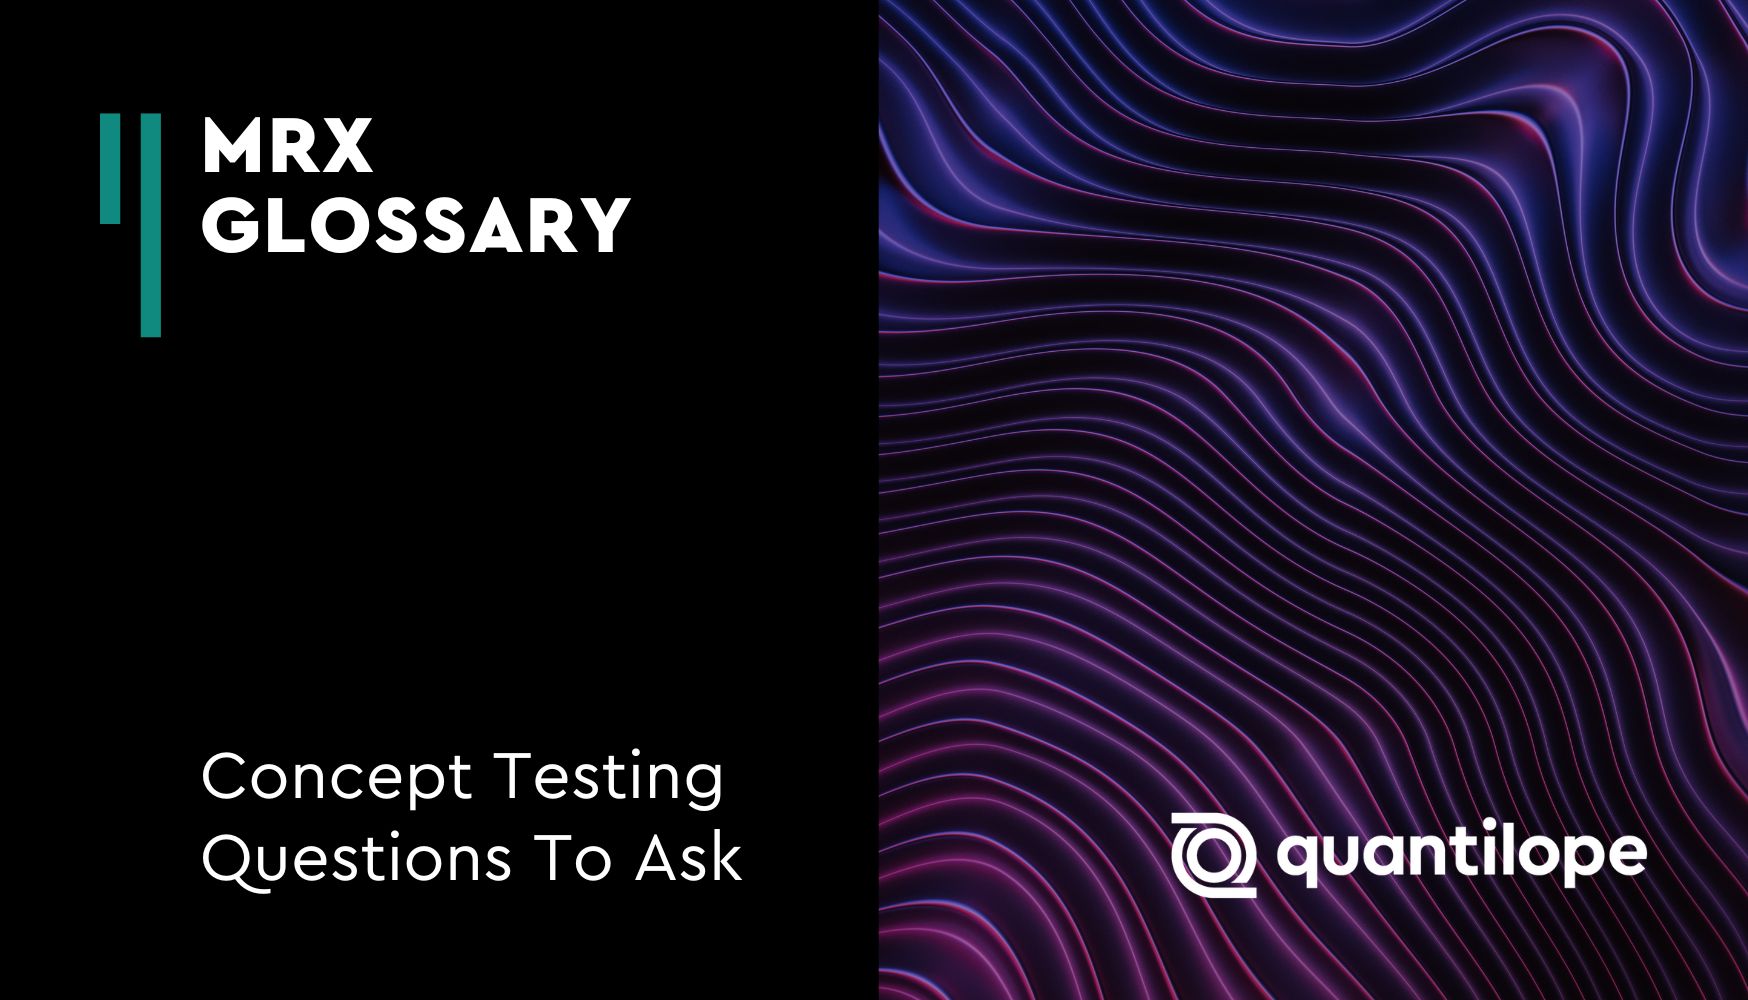 mrx glossary concept testing questions